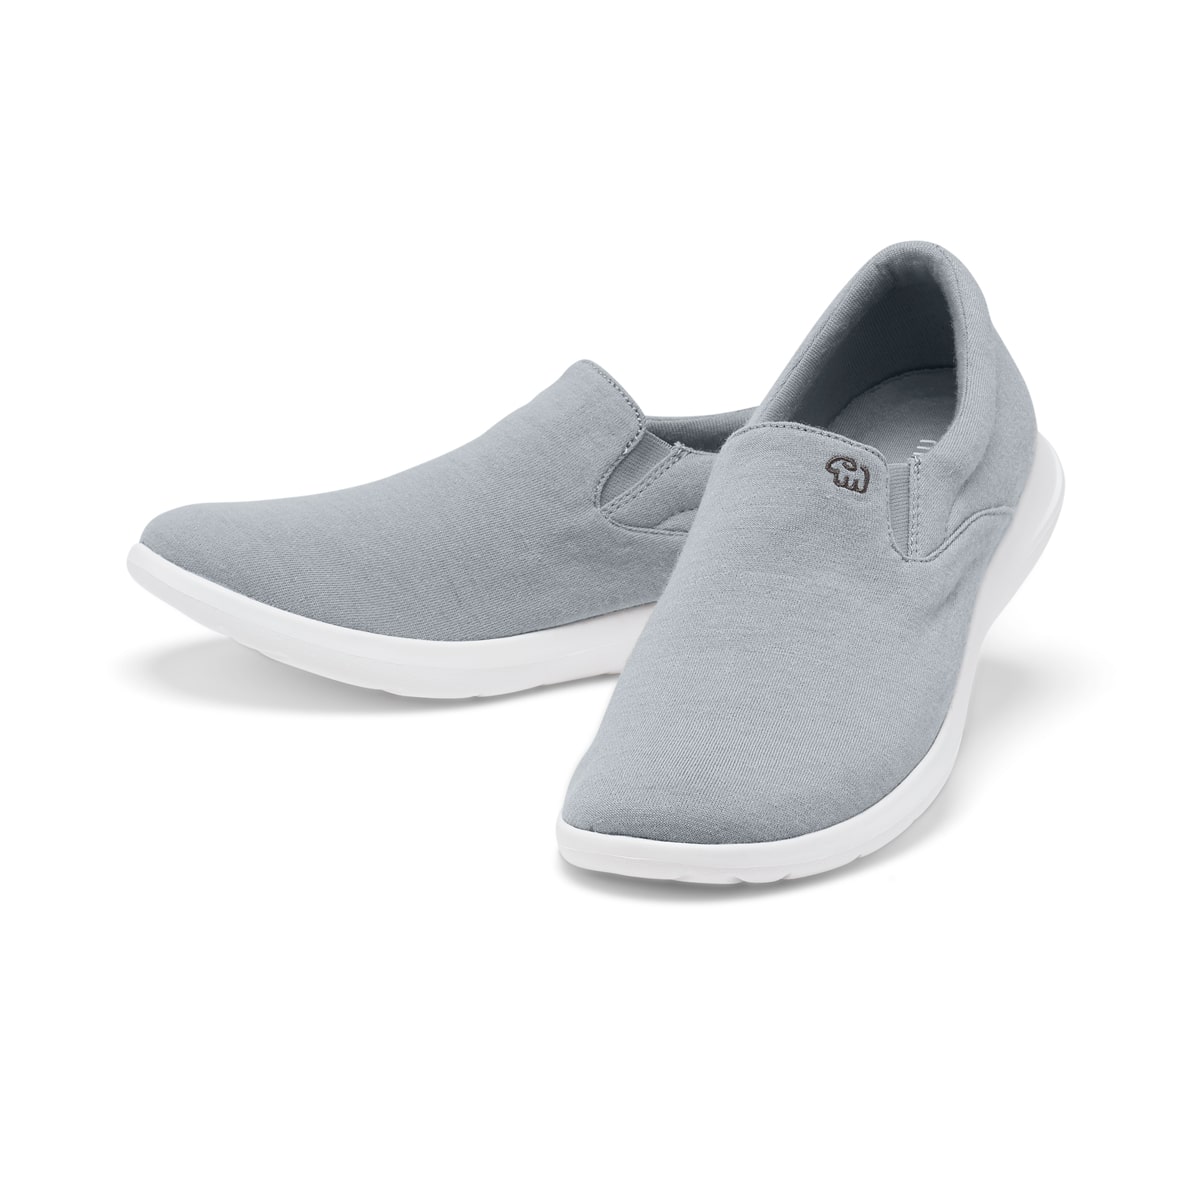 Chaussures Mérinos Hommes Gris Clair Slip On Paire